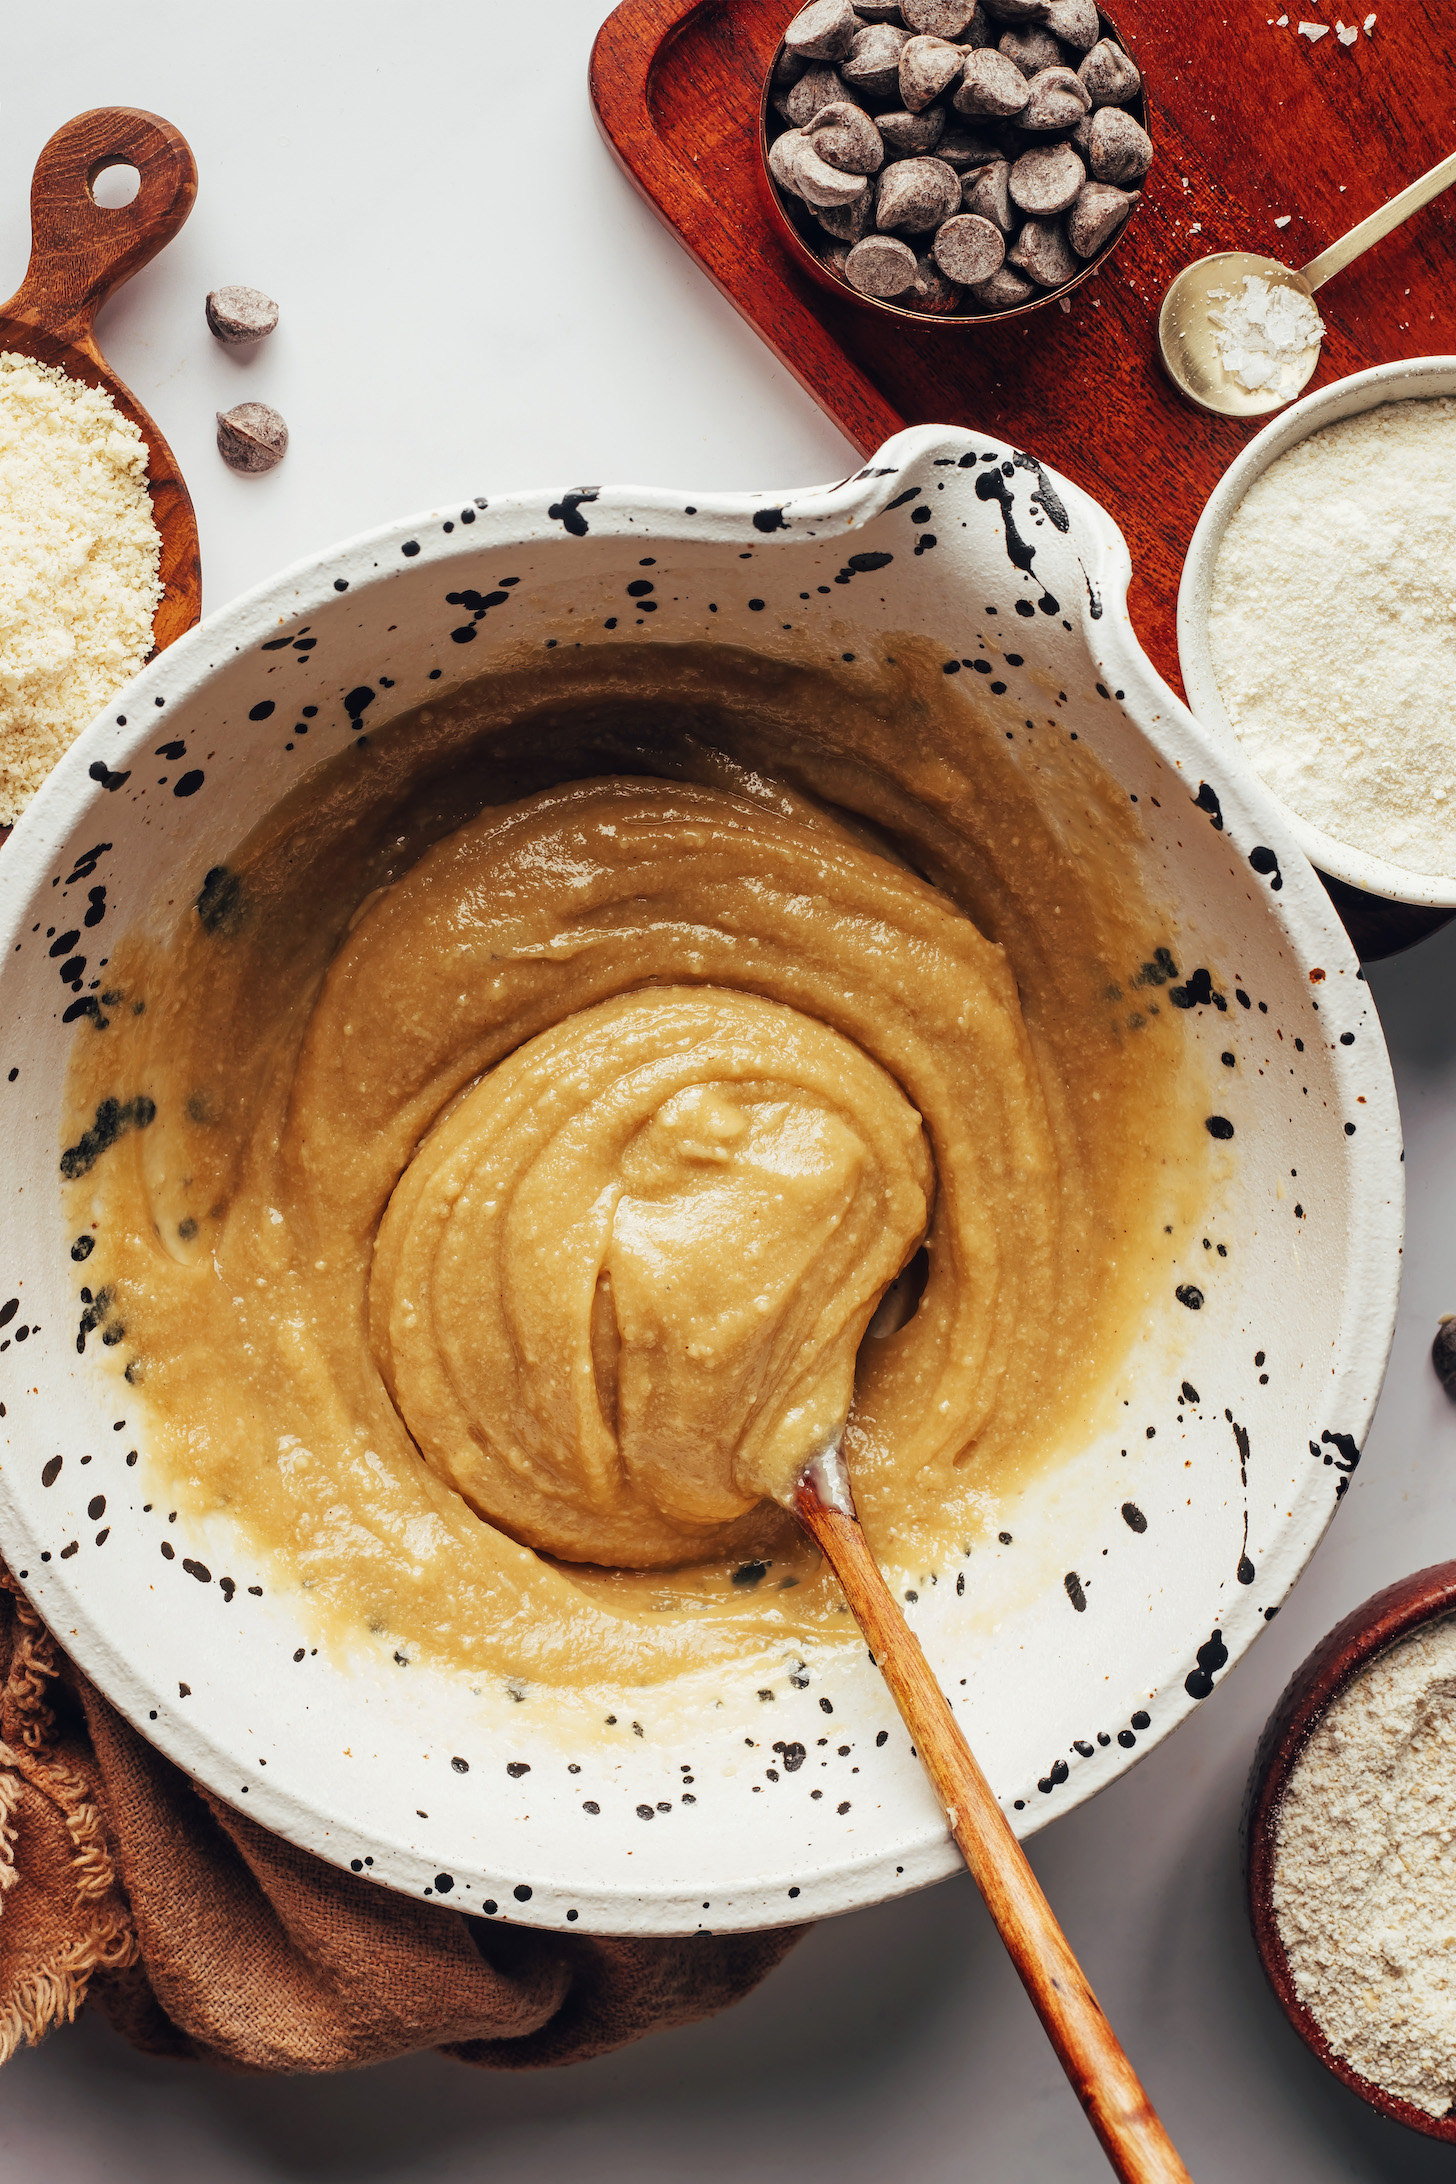 Stirring together cashew butter, maple syrup, and vanilla extract in a bowl